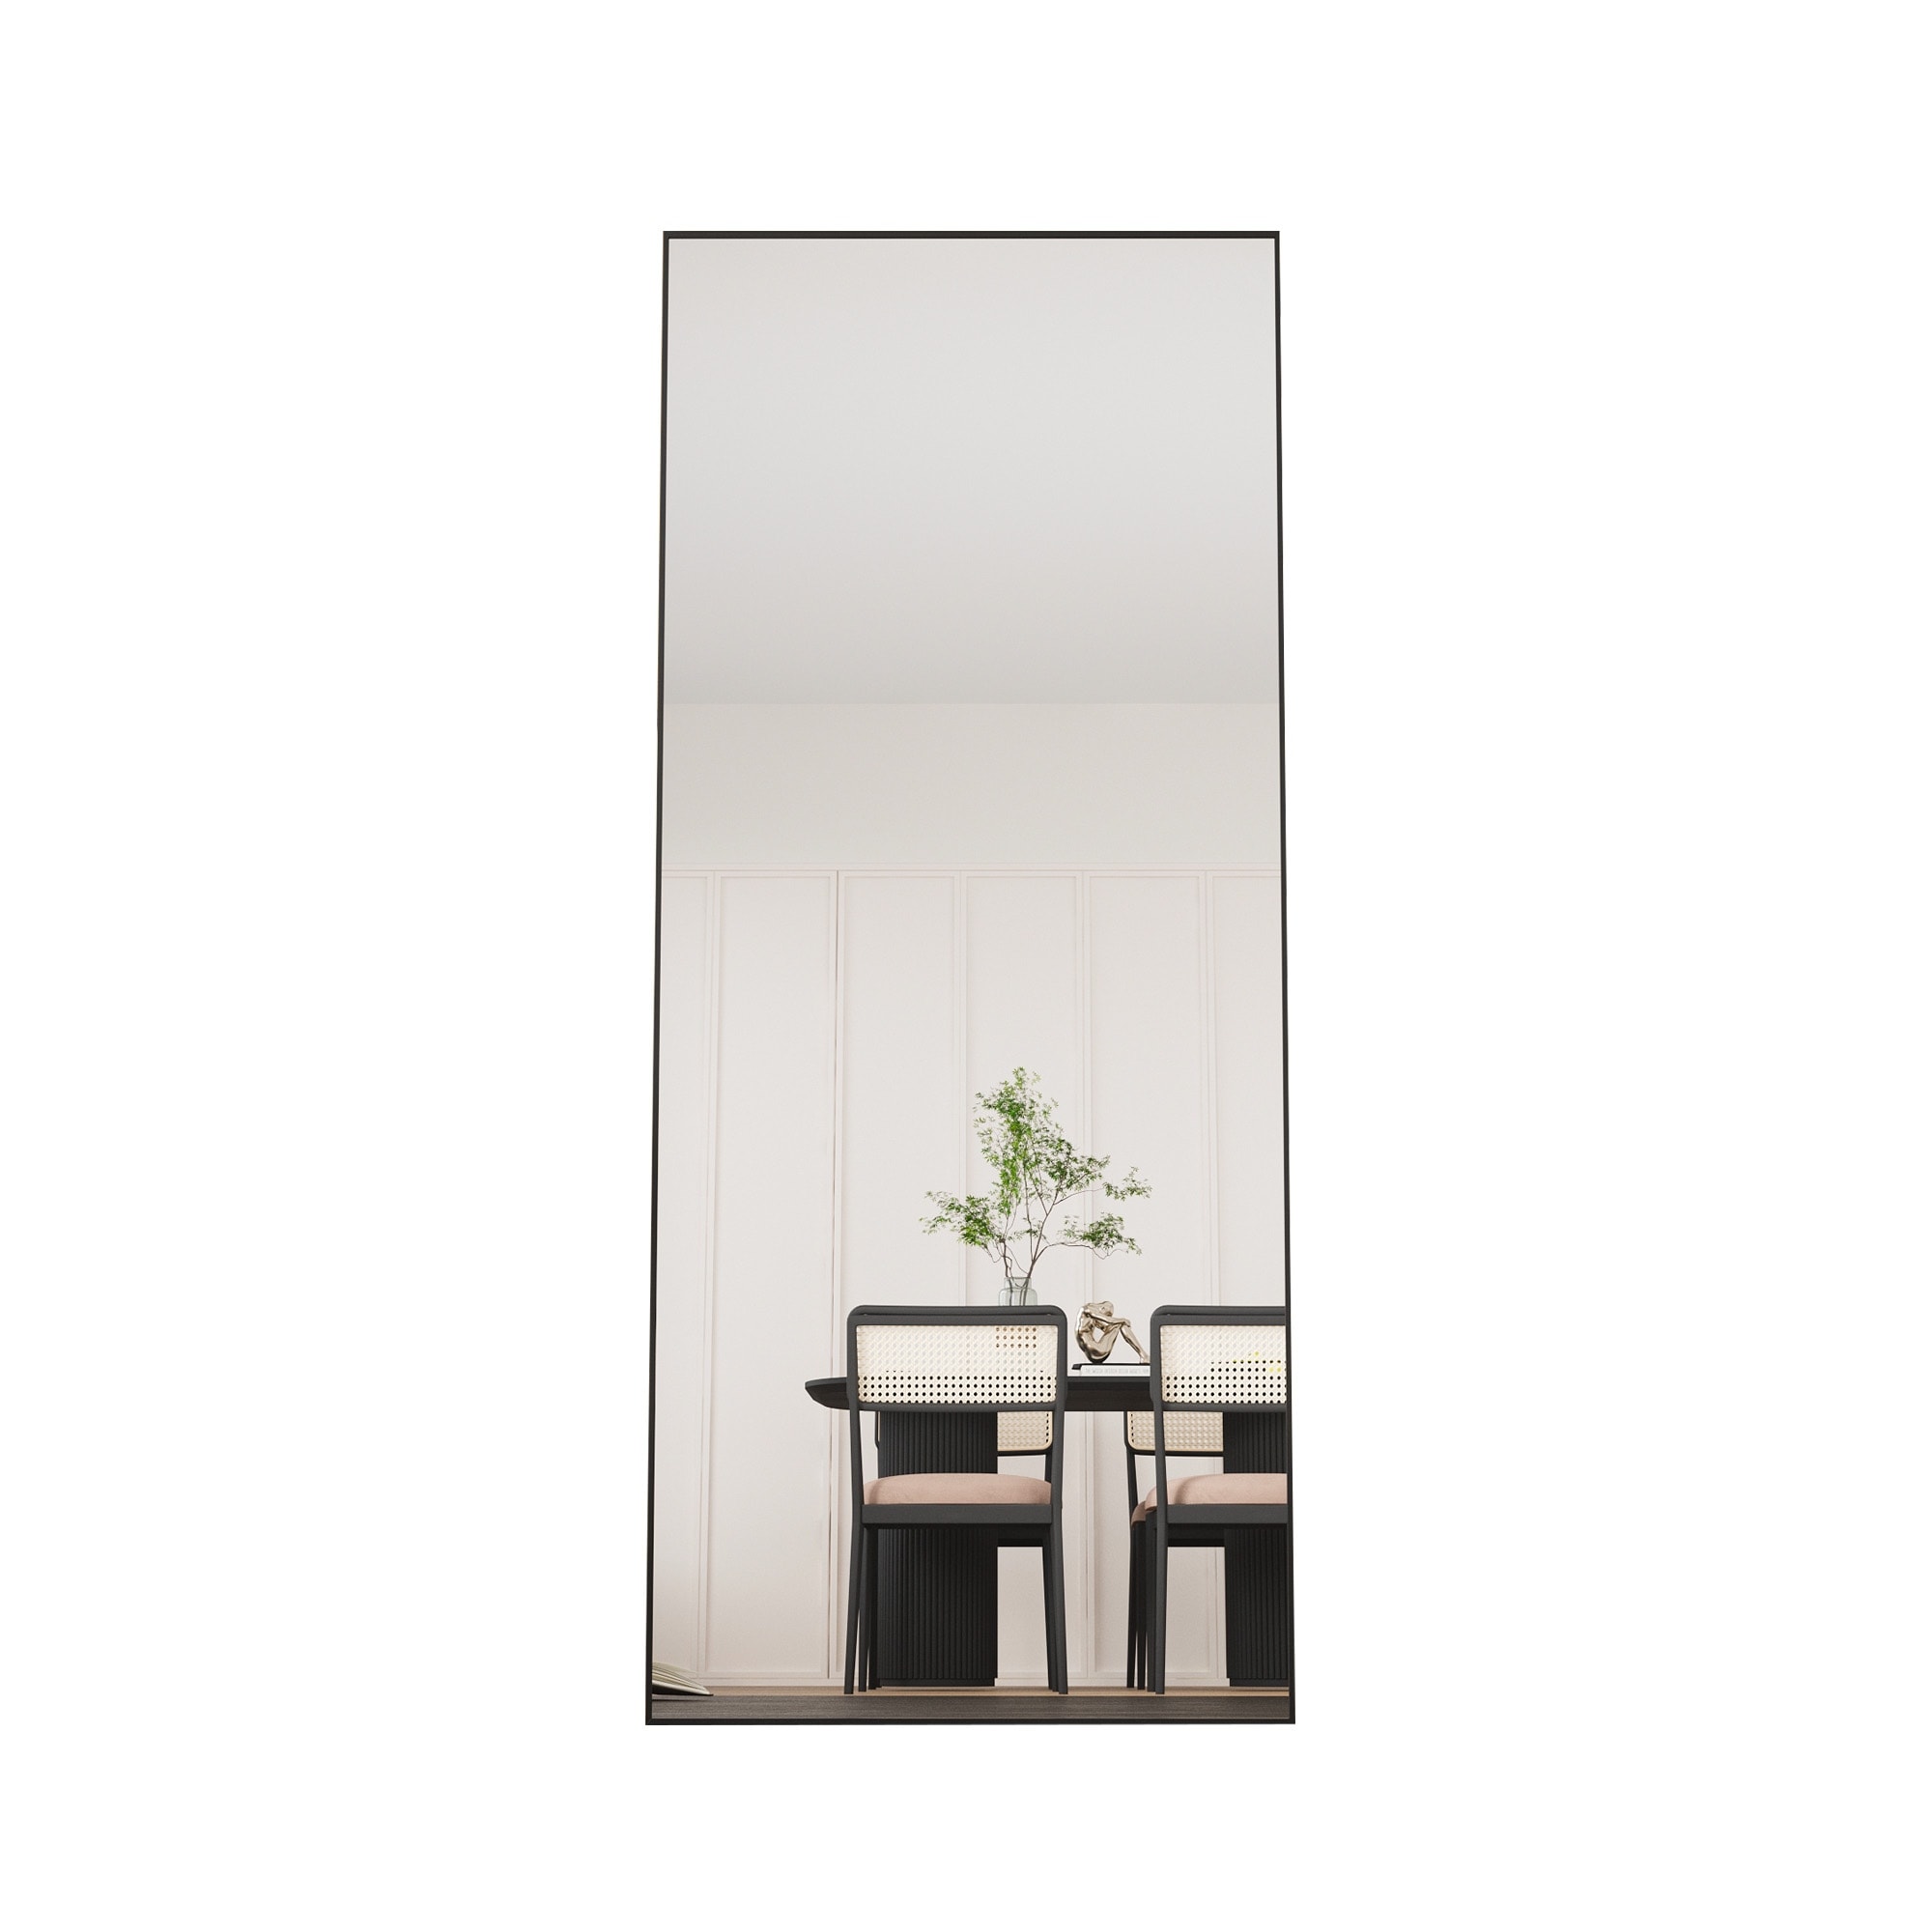 71"x"32" square rounded corners Full Length Mirror